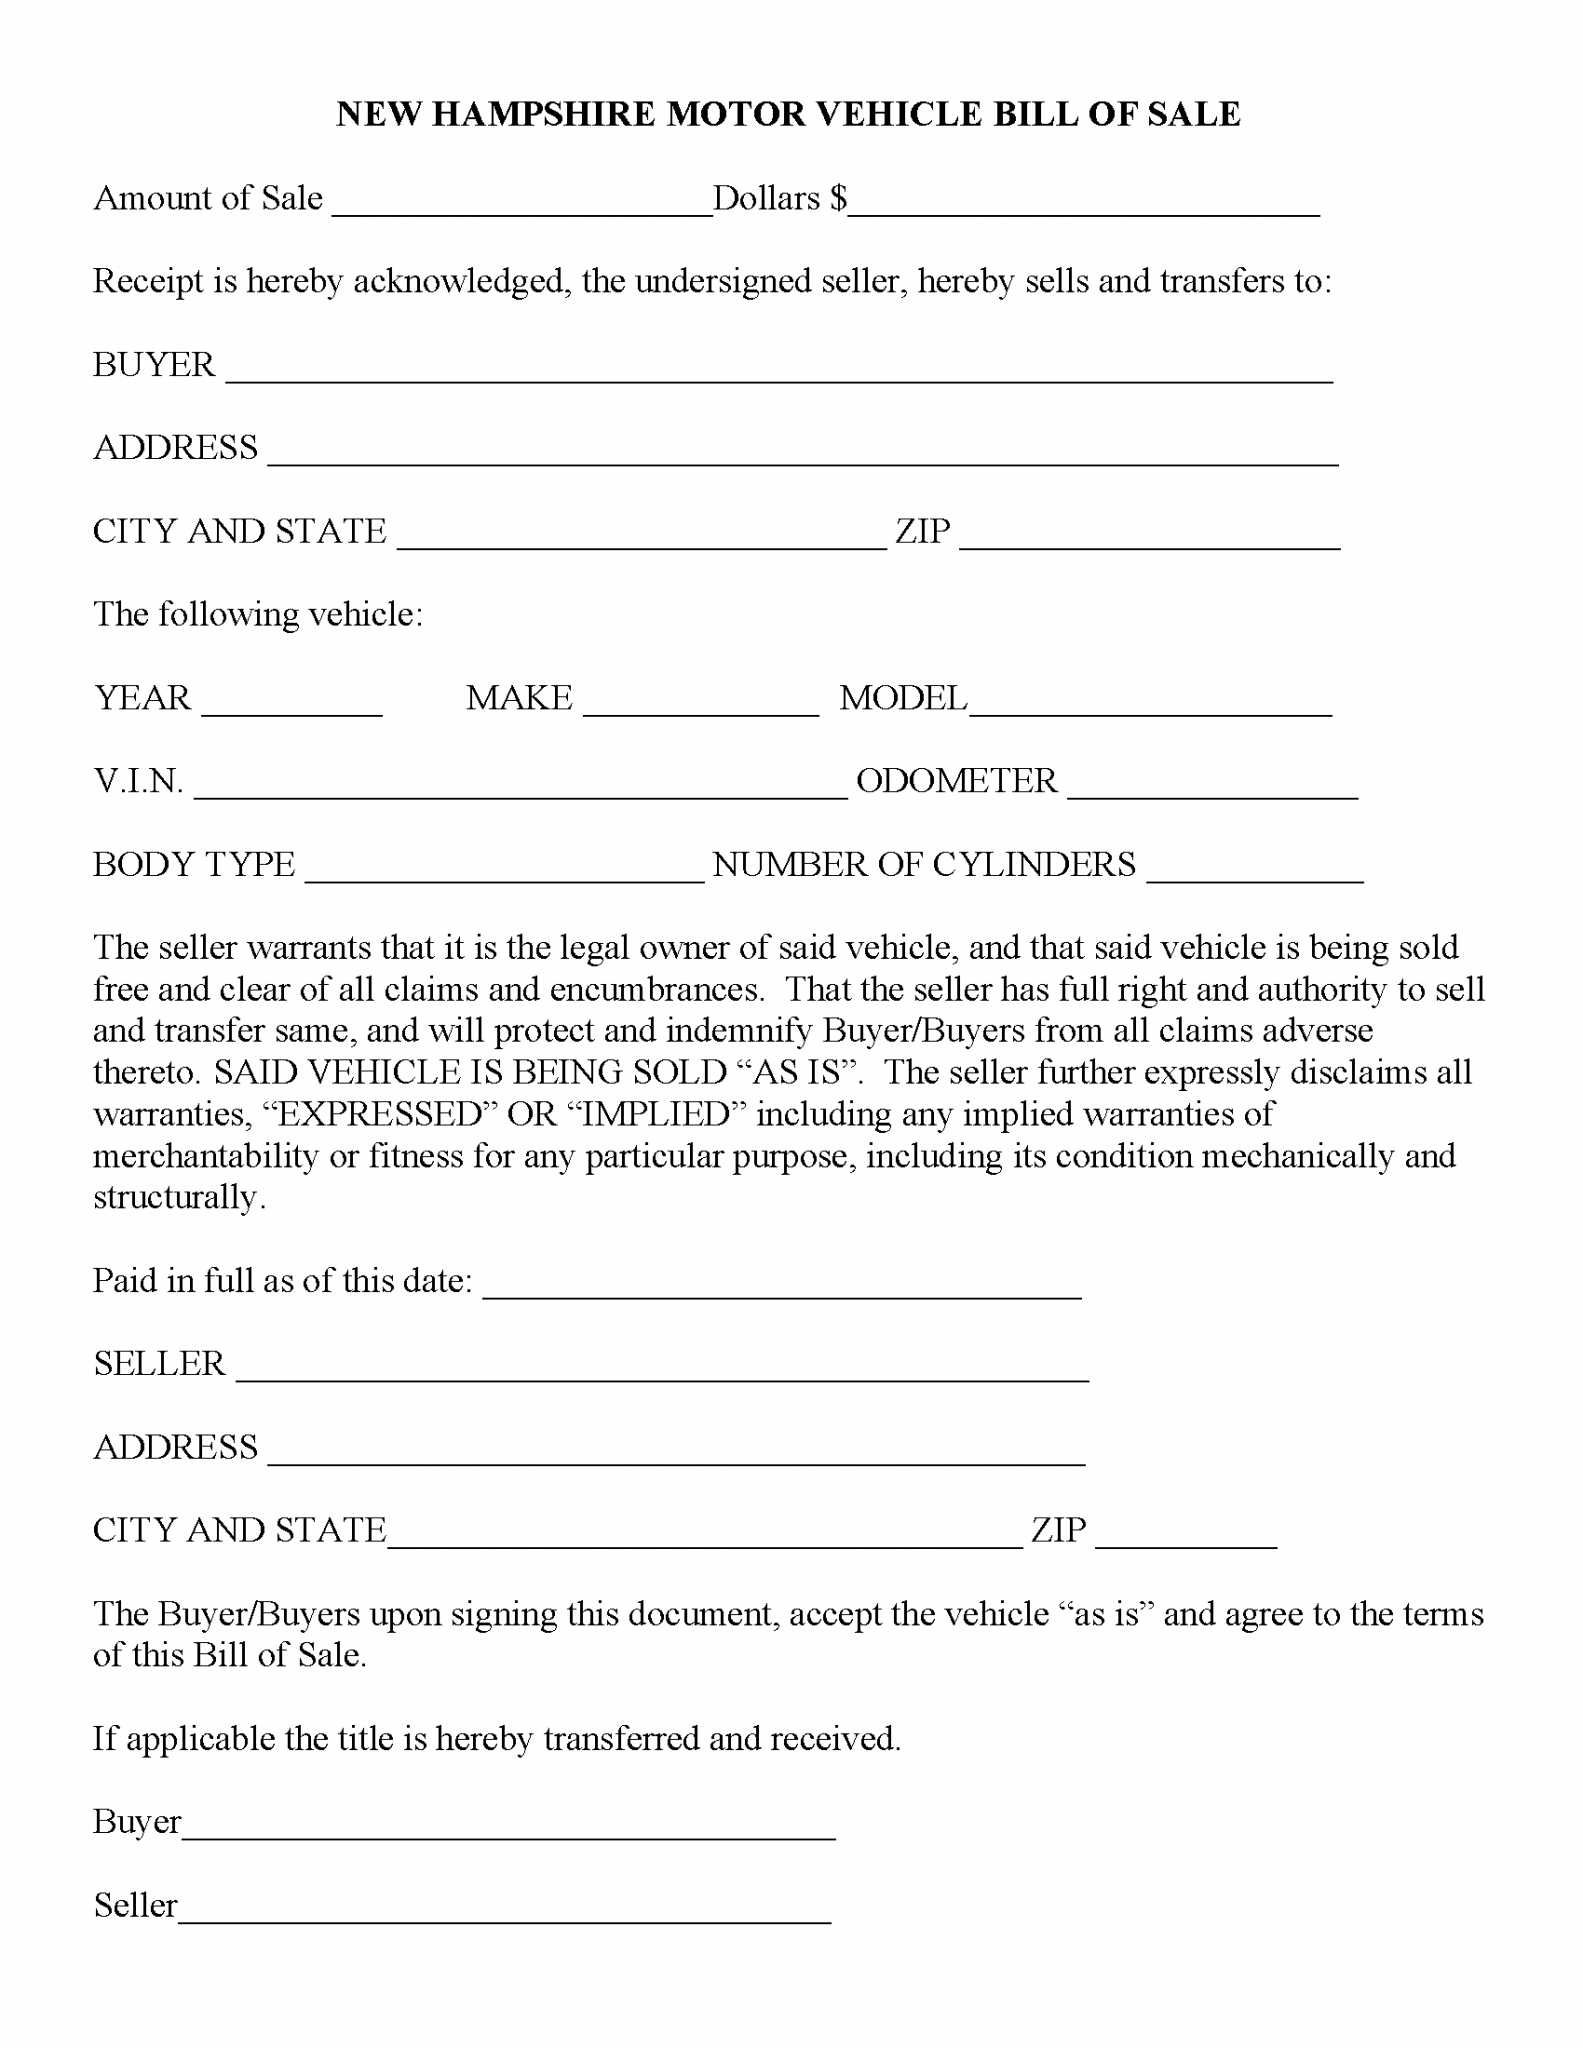 free-fillable-generic-bill-of-sale-form-pdf-templates-free-blank-bill-of-sale-form-pdf